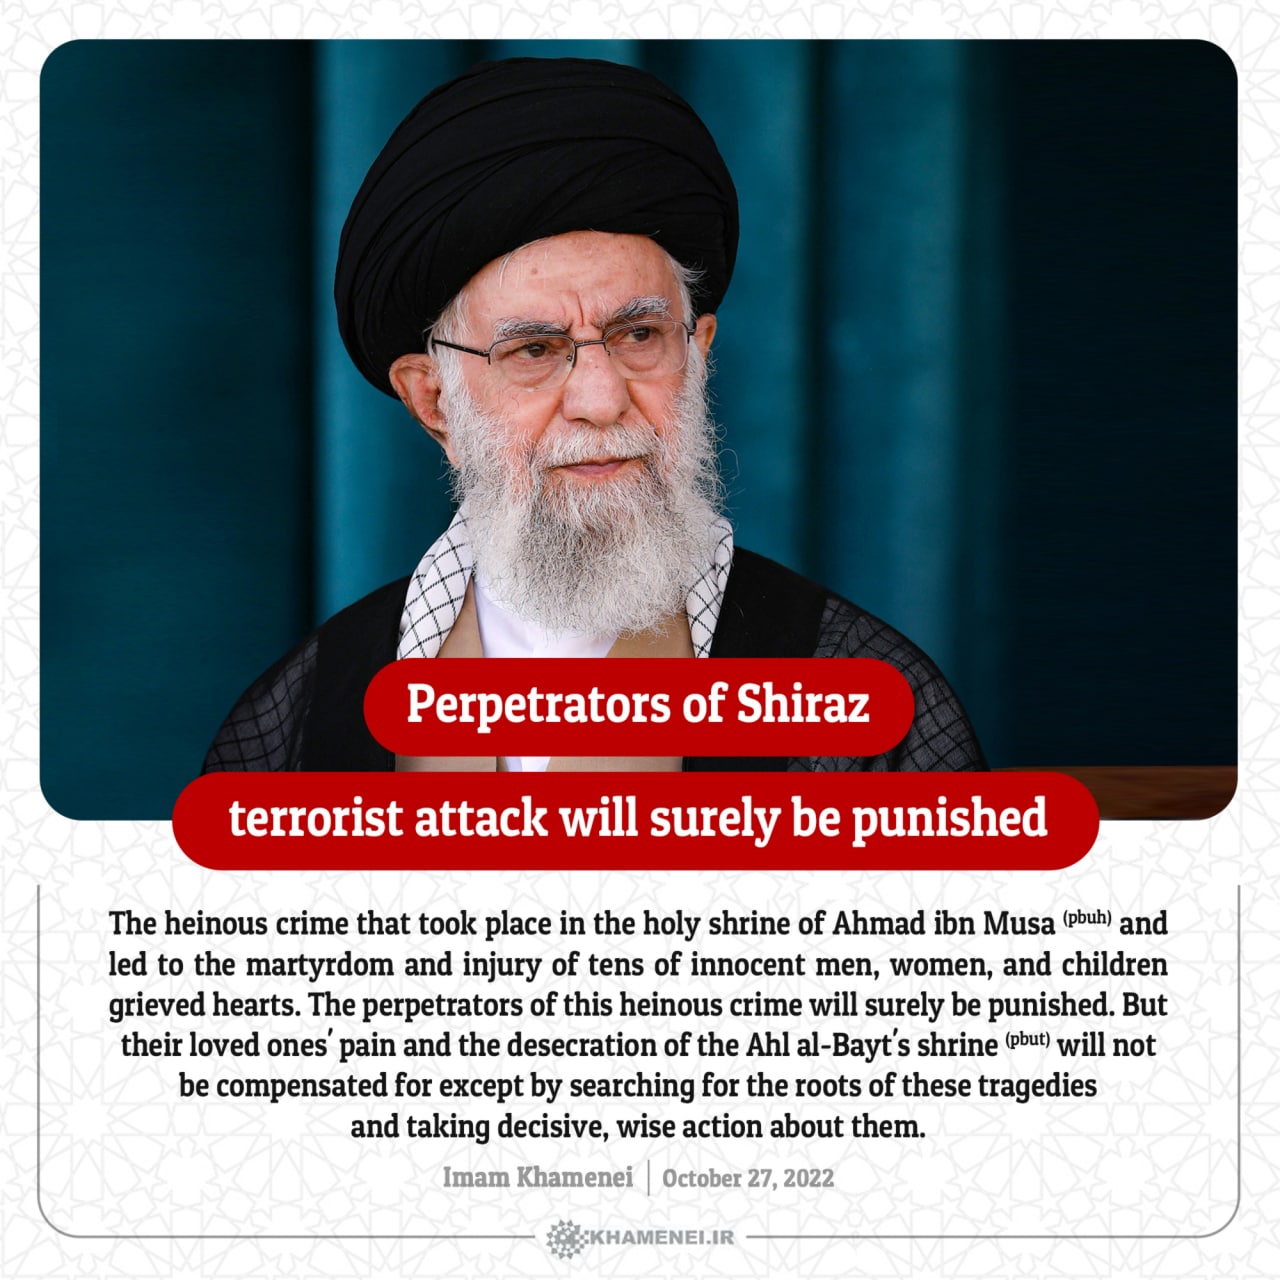 Perpetrators of Shiraz terrorist attack will surely be punished